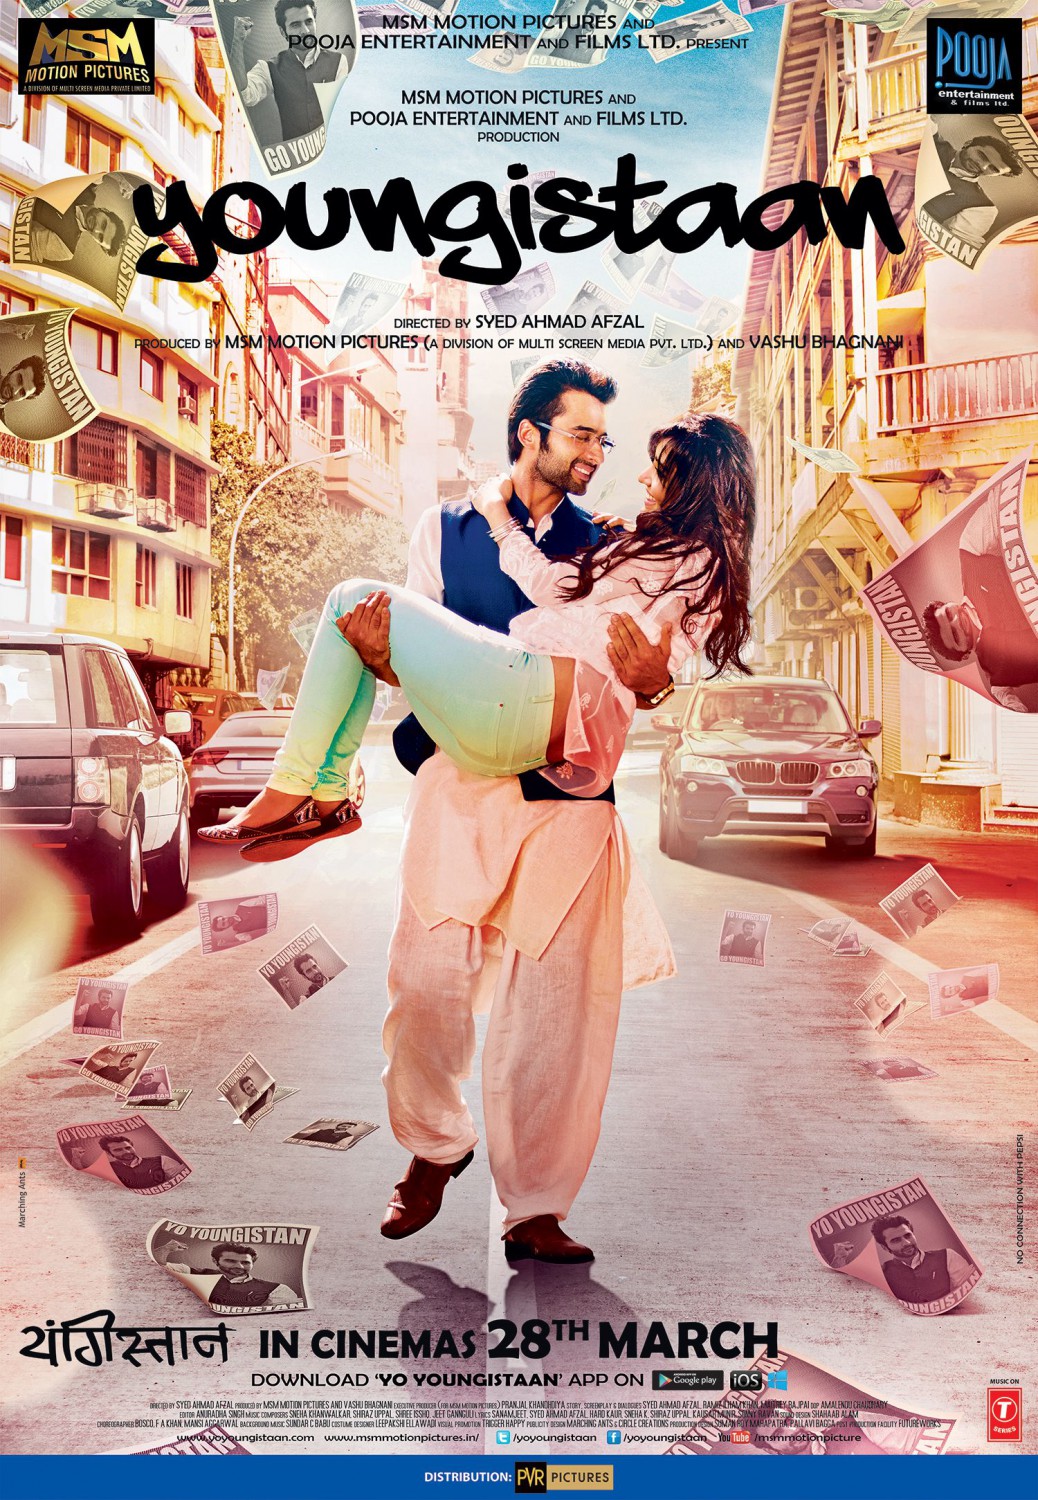 Extra Large Movie Poster Image for Youngistaan (#2 of 6)